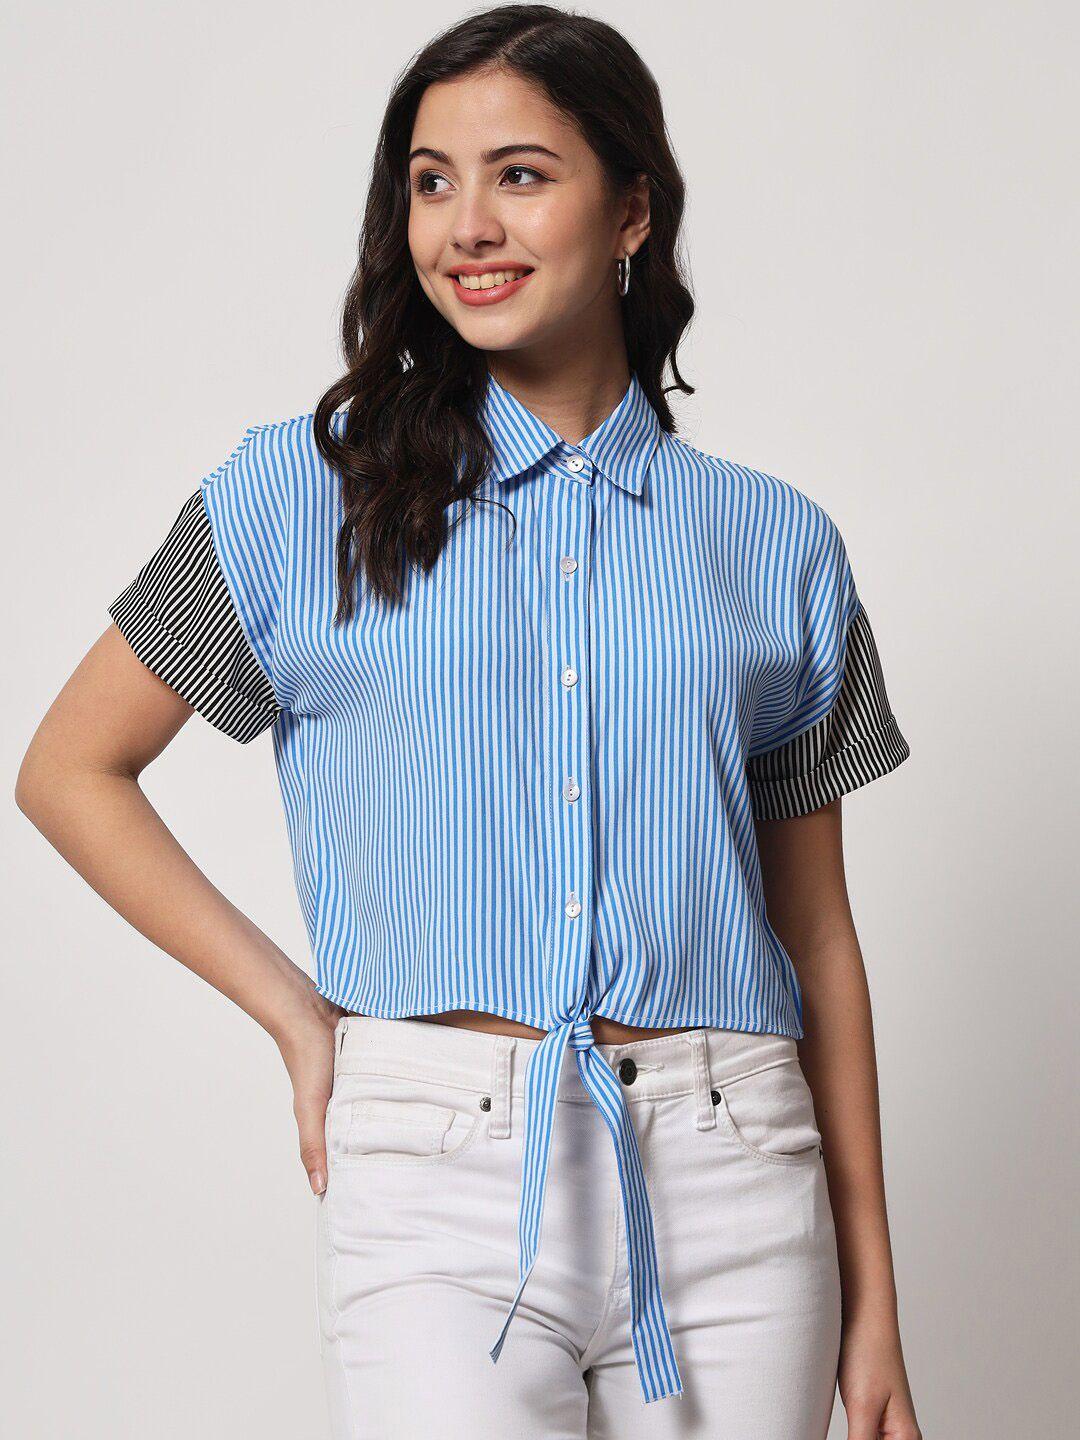 charmgal blue striped shirt style crop top